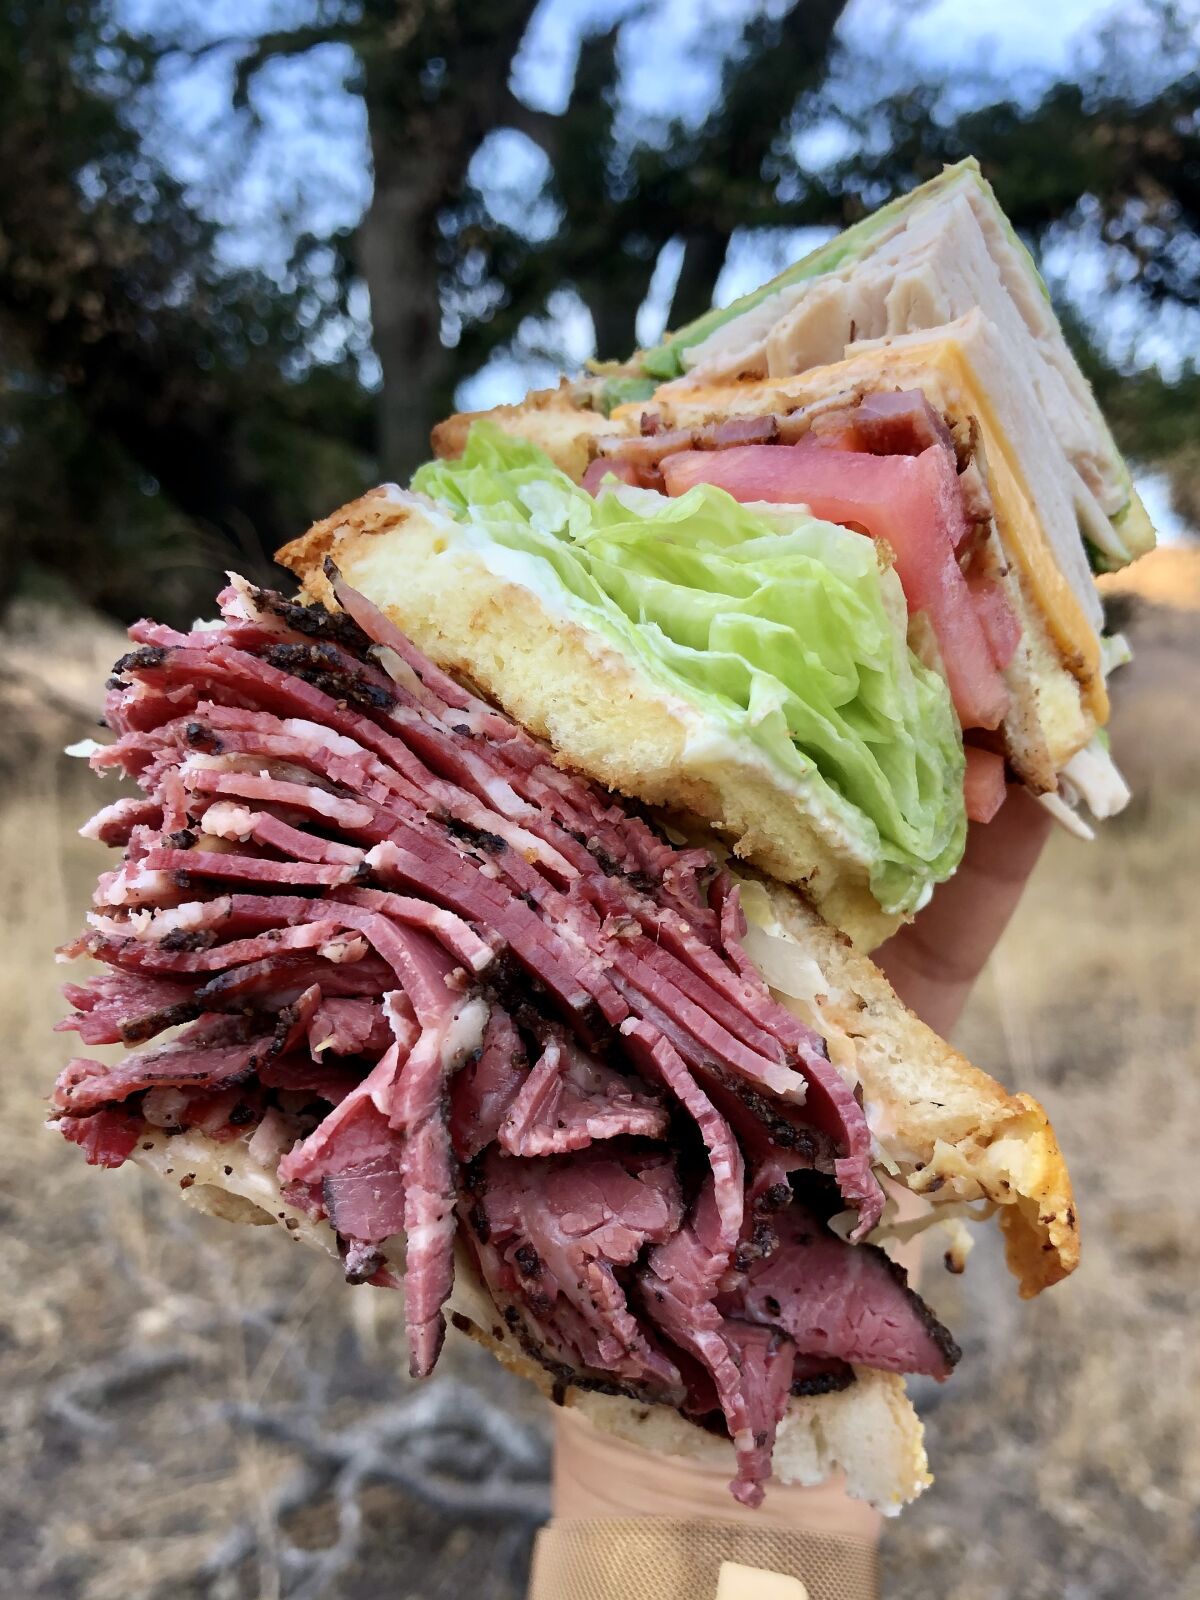 When hiking in the Conejo Valley, you want Brent's Deli black pastrami. The club sandwich was less sensible.